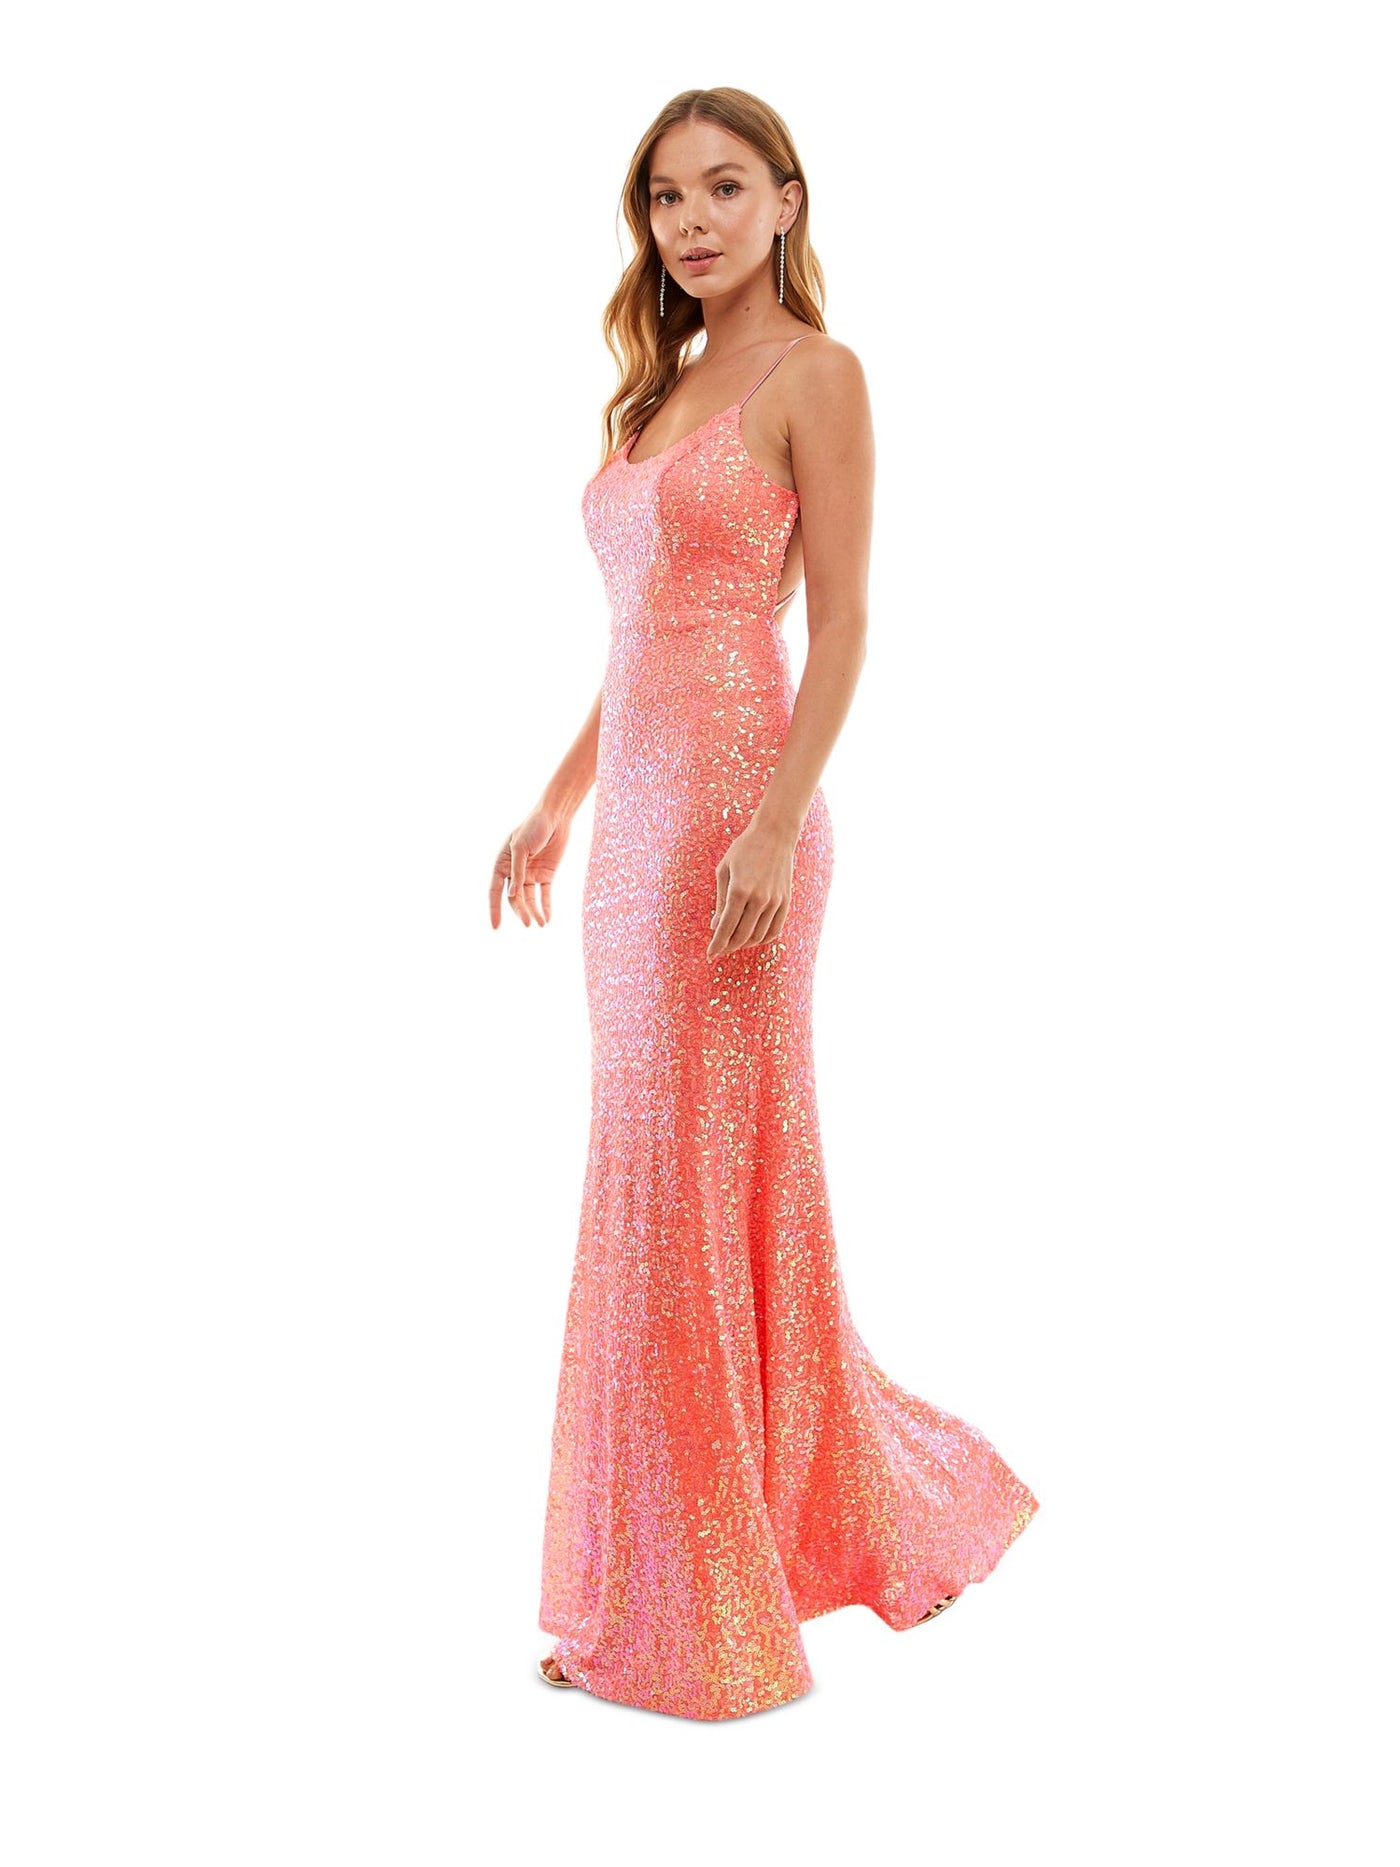 CITY STUDIO Womens Coral Zippered Lined Strappy Open Back Spaghetti Strap Scoop Neck Full-Length Prom Gown Dress Juniors 9